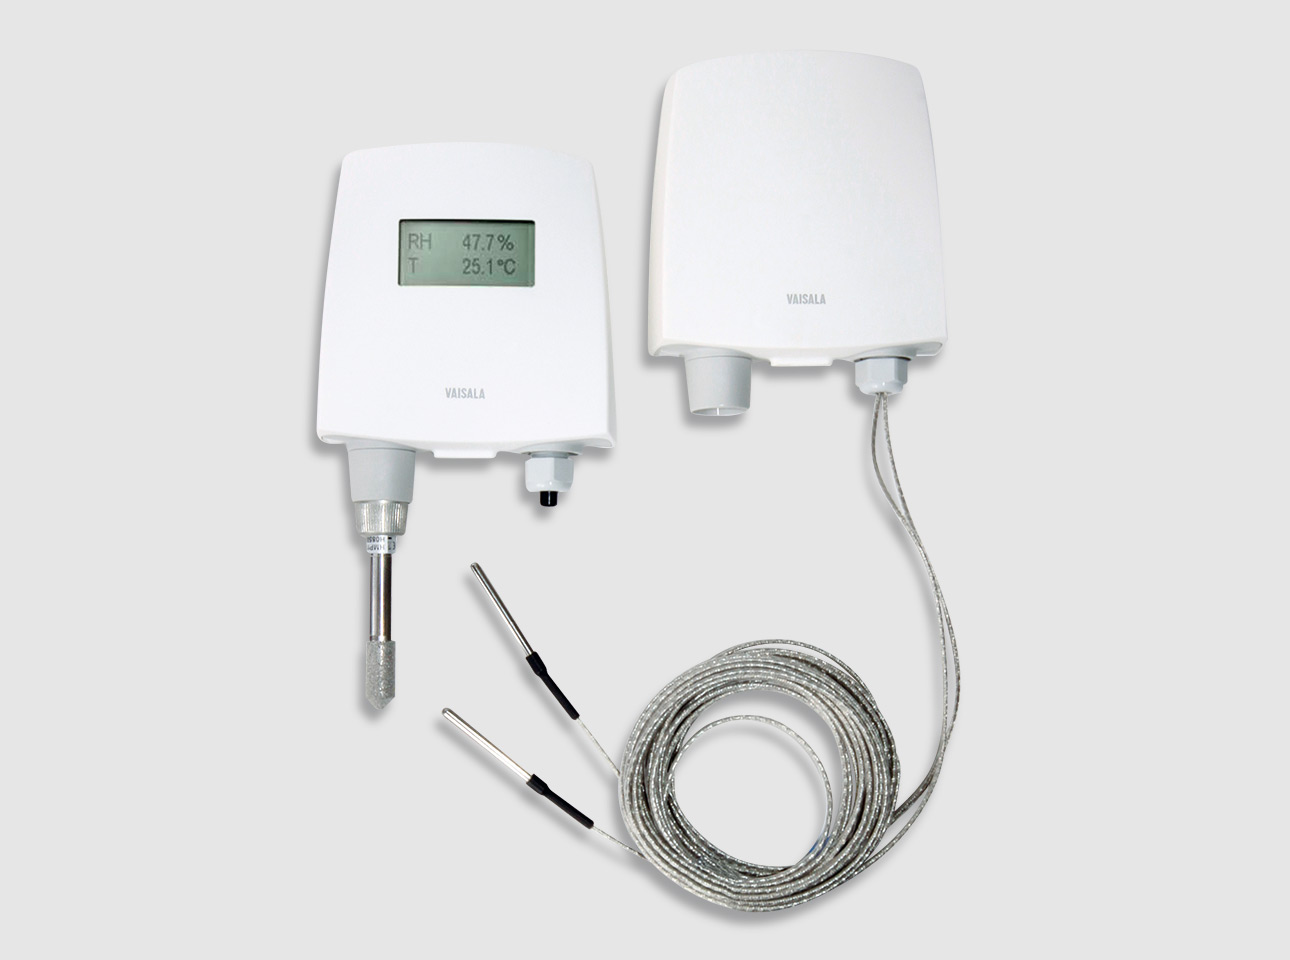 The Vaisala HMT140 wi-fi data logger is designed for humidity, temperature and analog signal monitoring in life science applications.